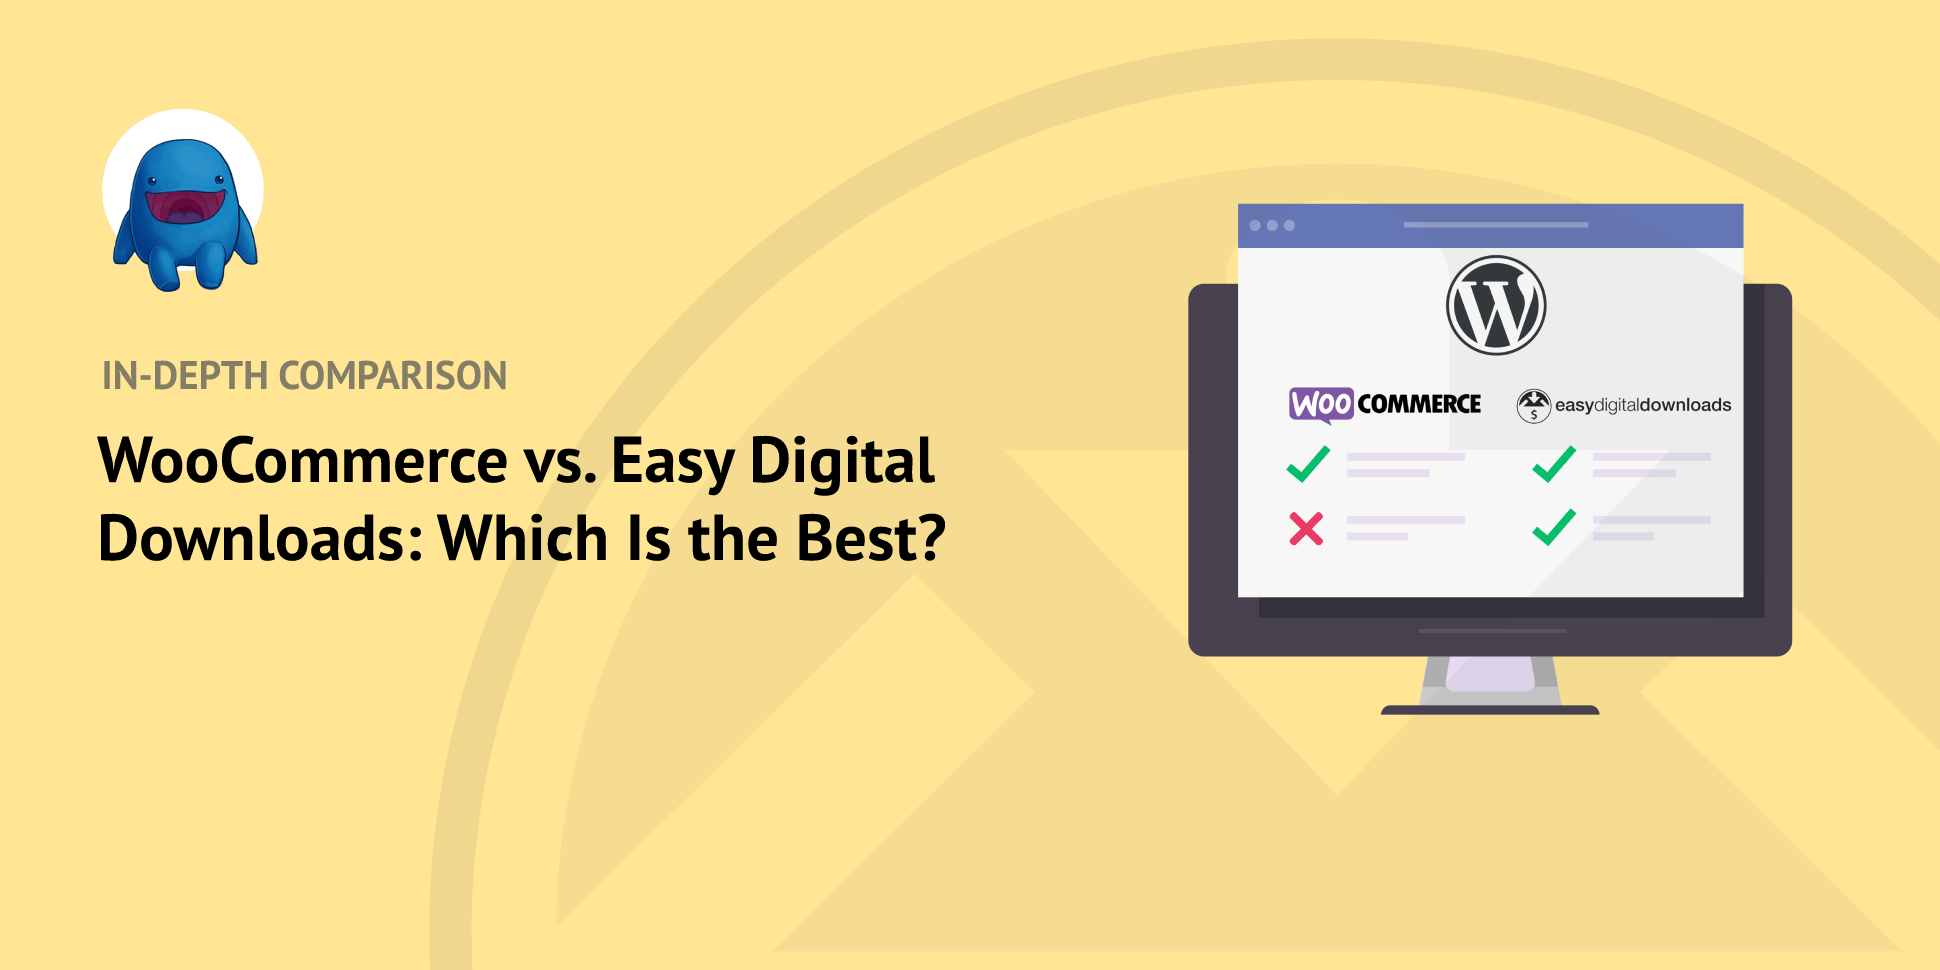 WooCommerce vs. Easy Digital Downloads: Which Is the Best?